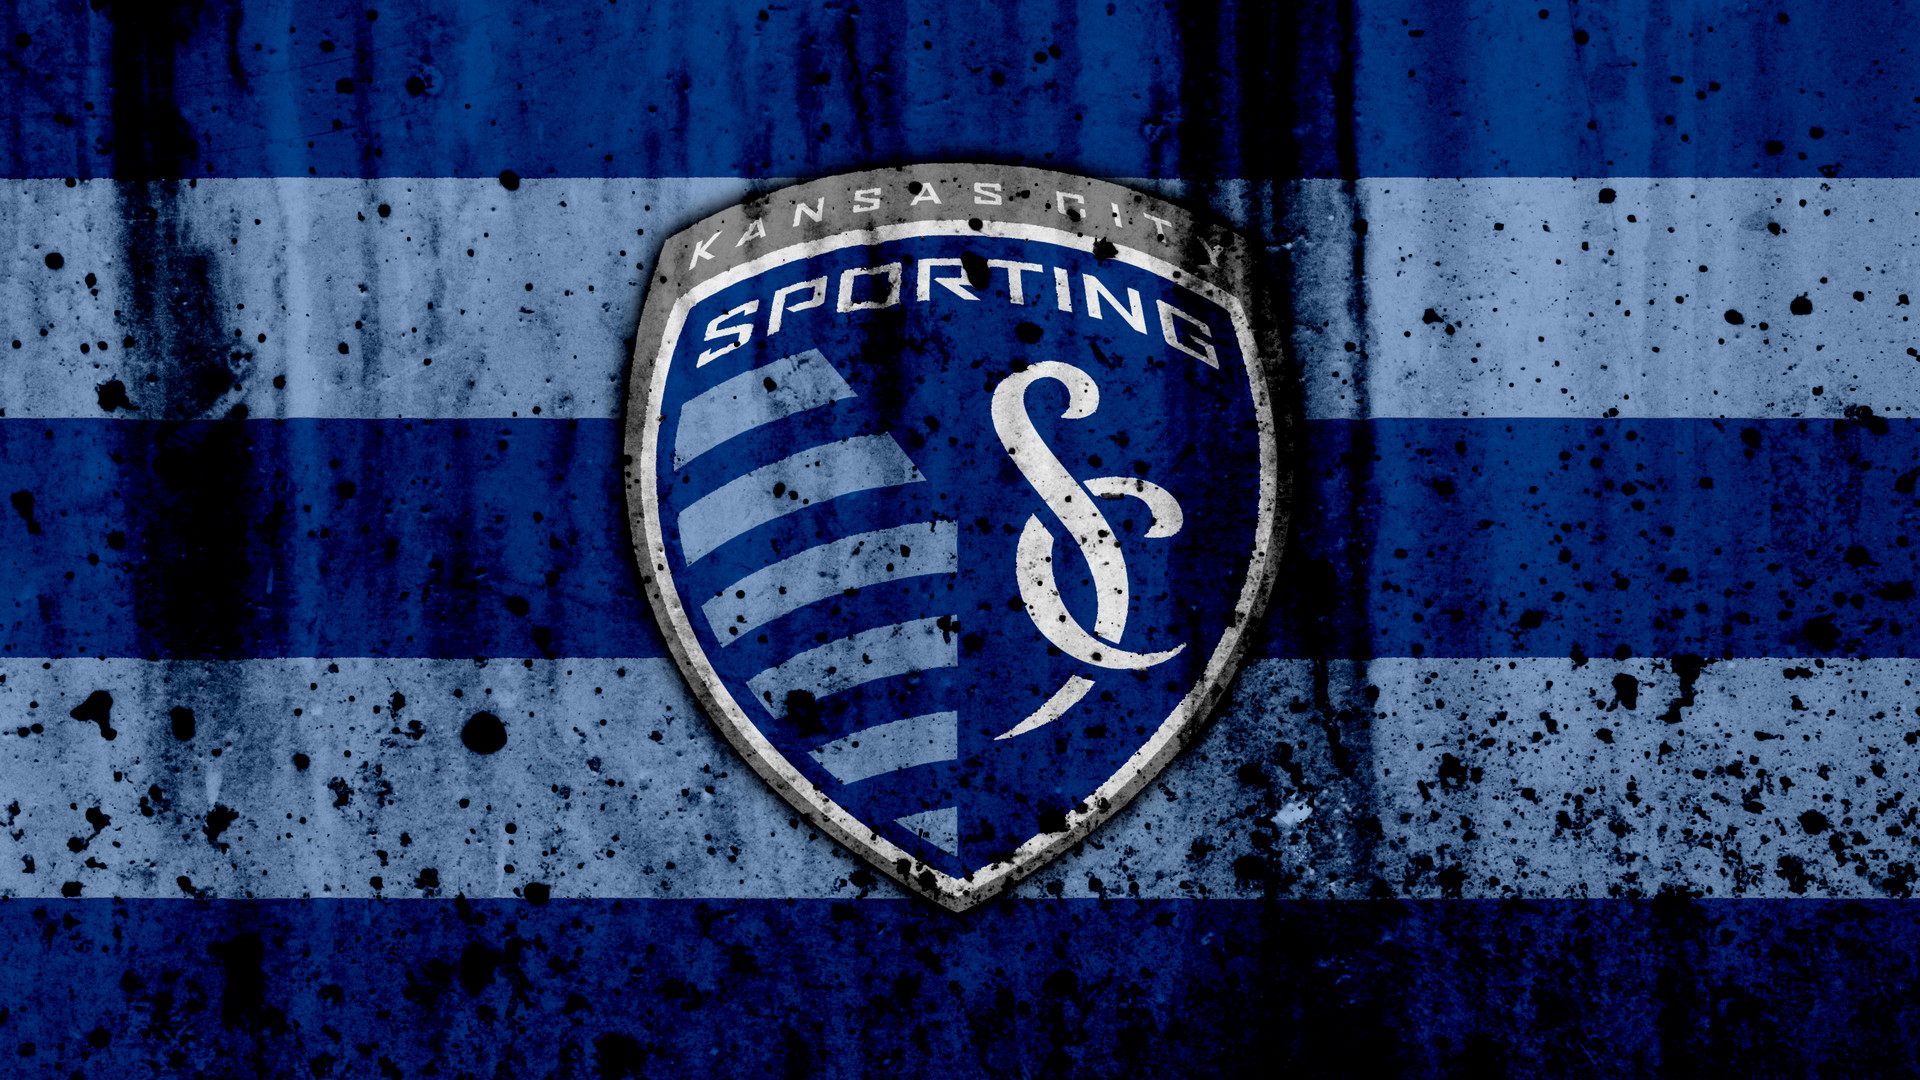 Wallpapers HD Sporting Kansas City With high-resolution 1920X1080 pixel. You can use this wallpaper for your Desktop Computers, Mac Screensavers, Windows Backgrounds, iPhone Wallpapers, Tablet or Android Lock screen and another Mobile device